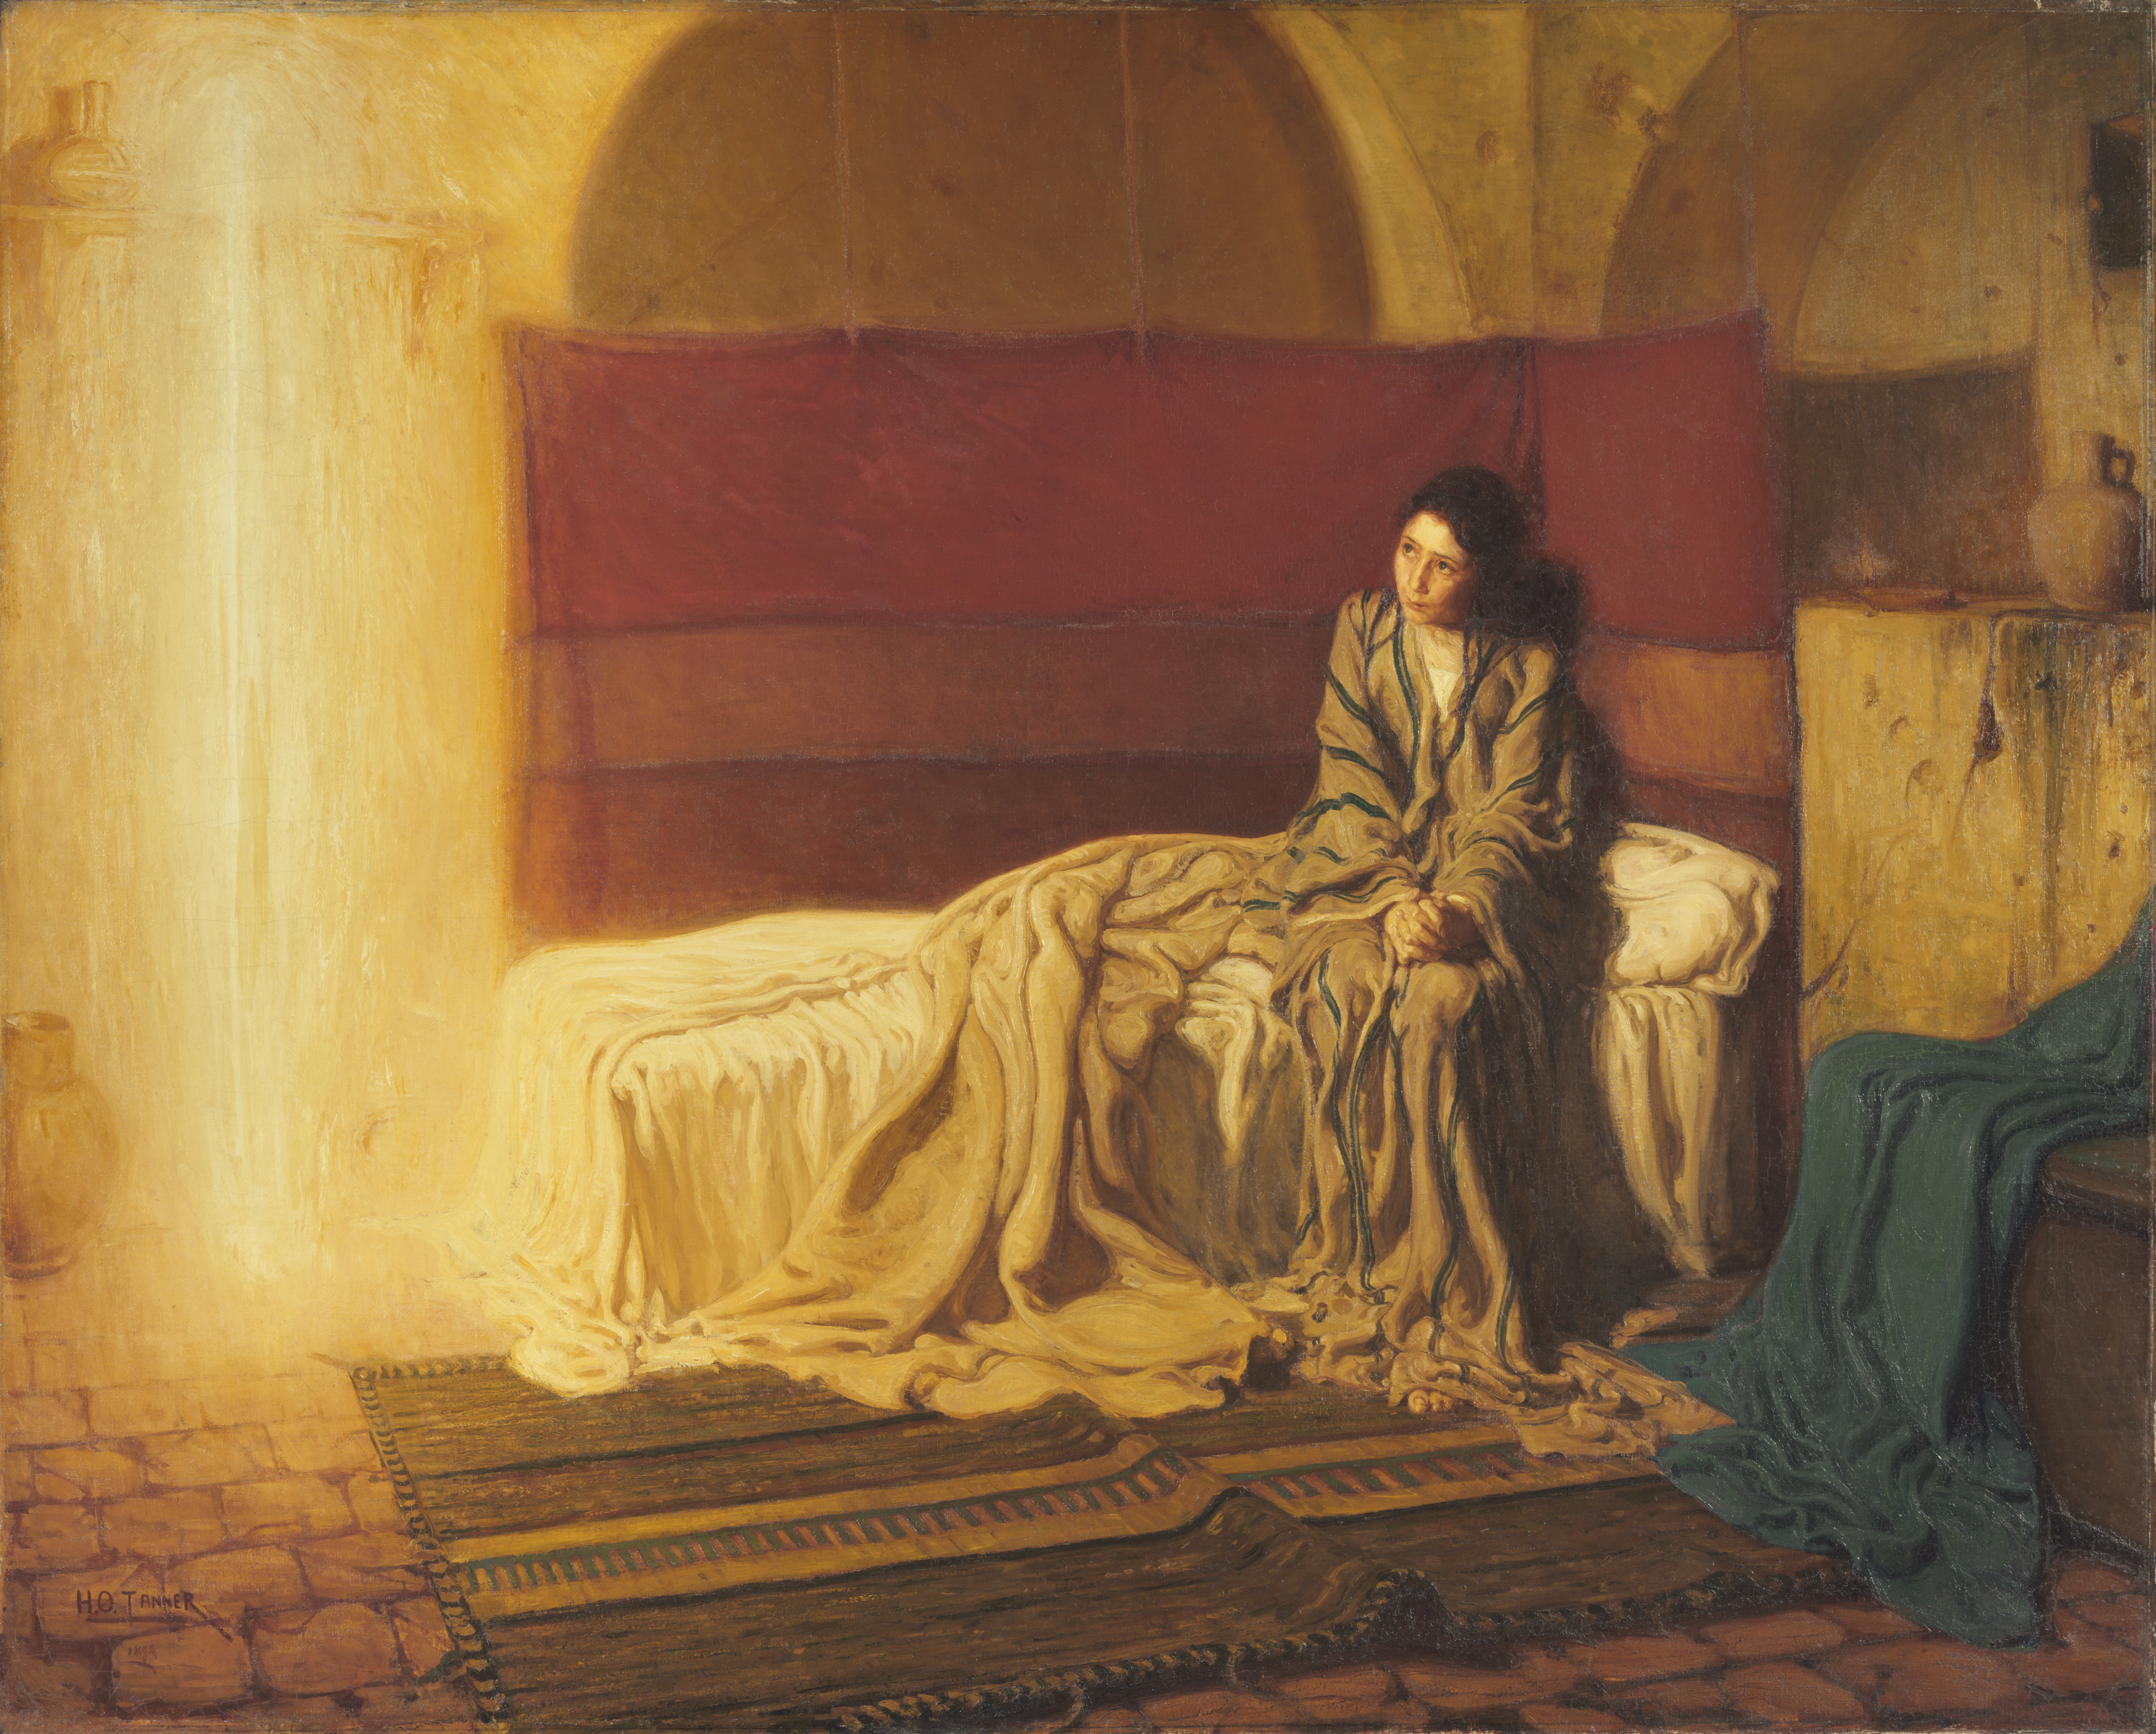 The Annunciation, 1898, Henry Ossawa Tanner, American (Philadelphia Museum of Art, Purchased with the W. P. Wilstach Fund, 1899)